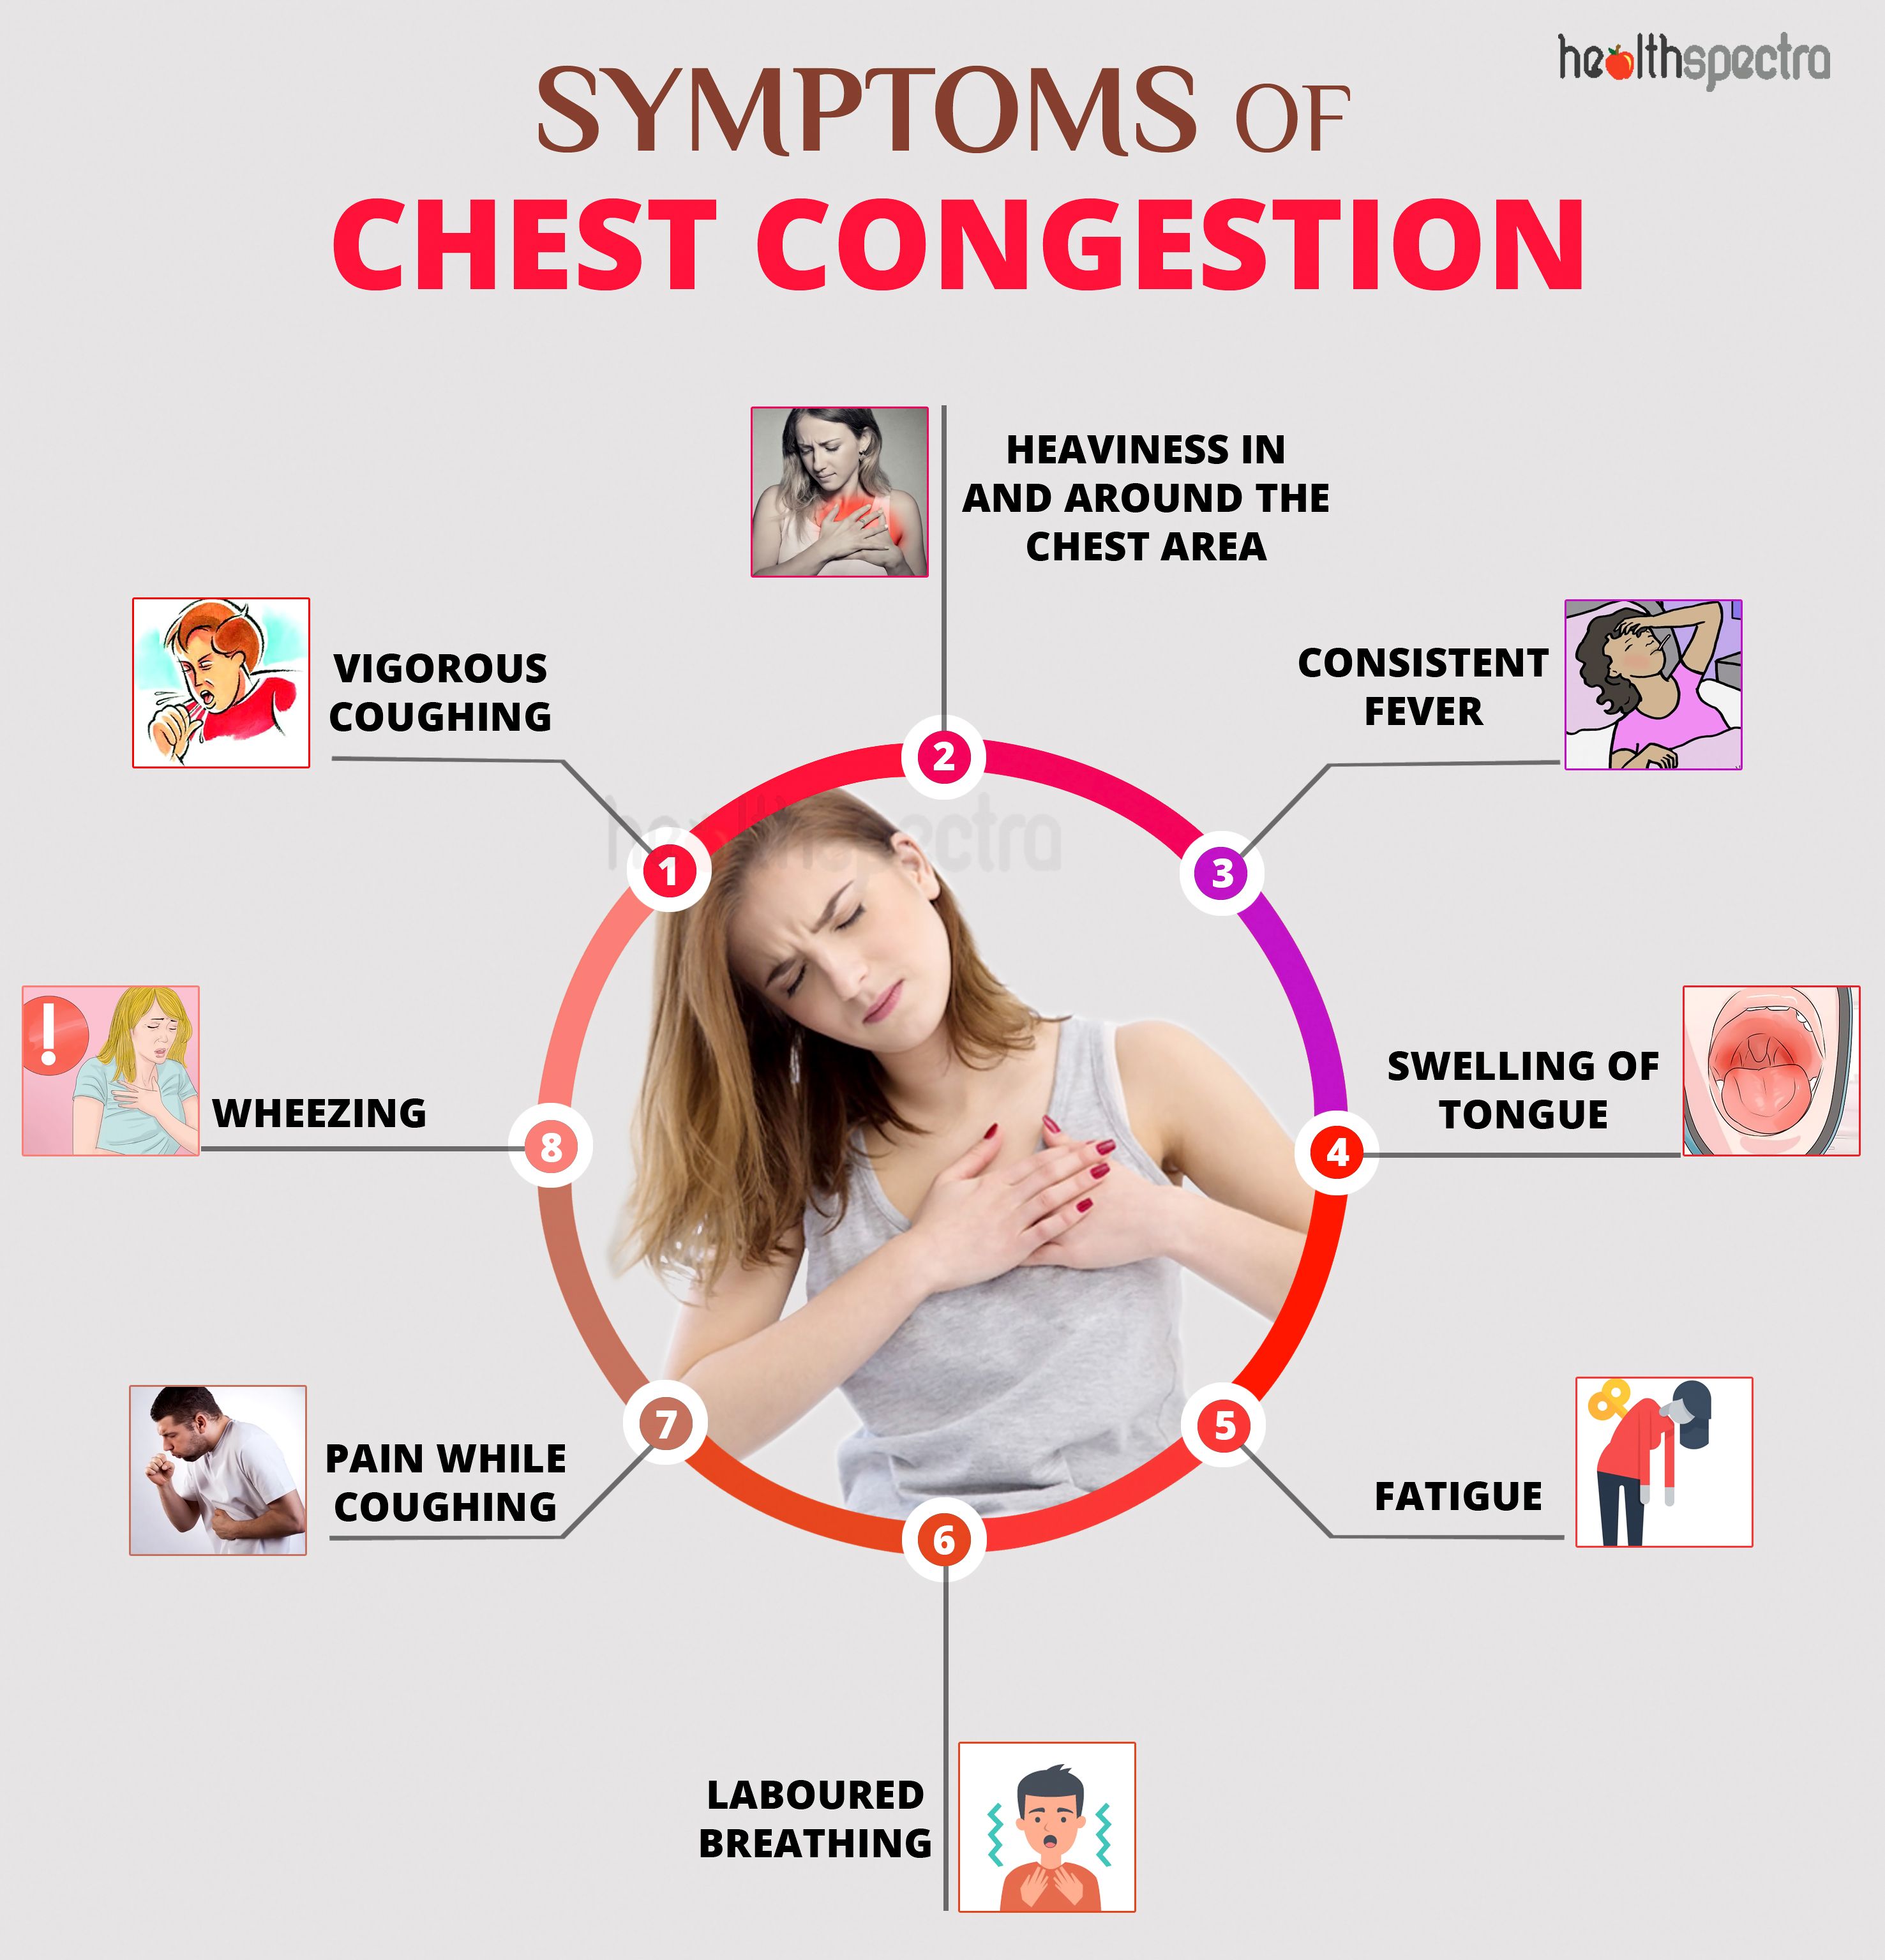 Symptoms of Chest Congestion